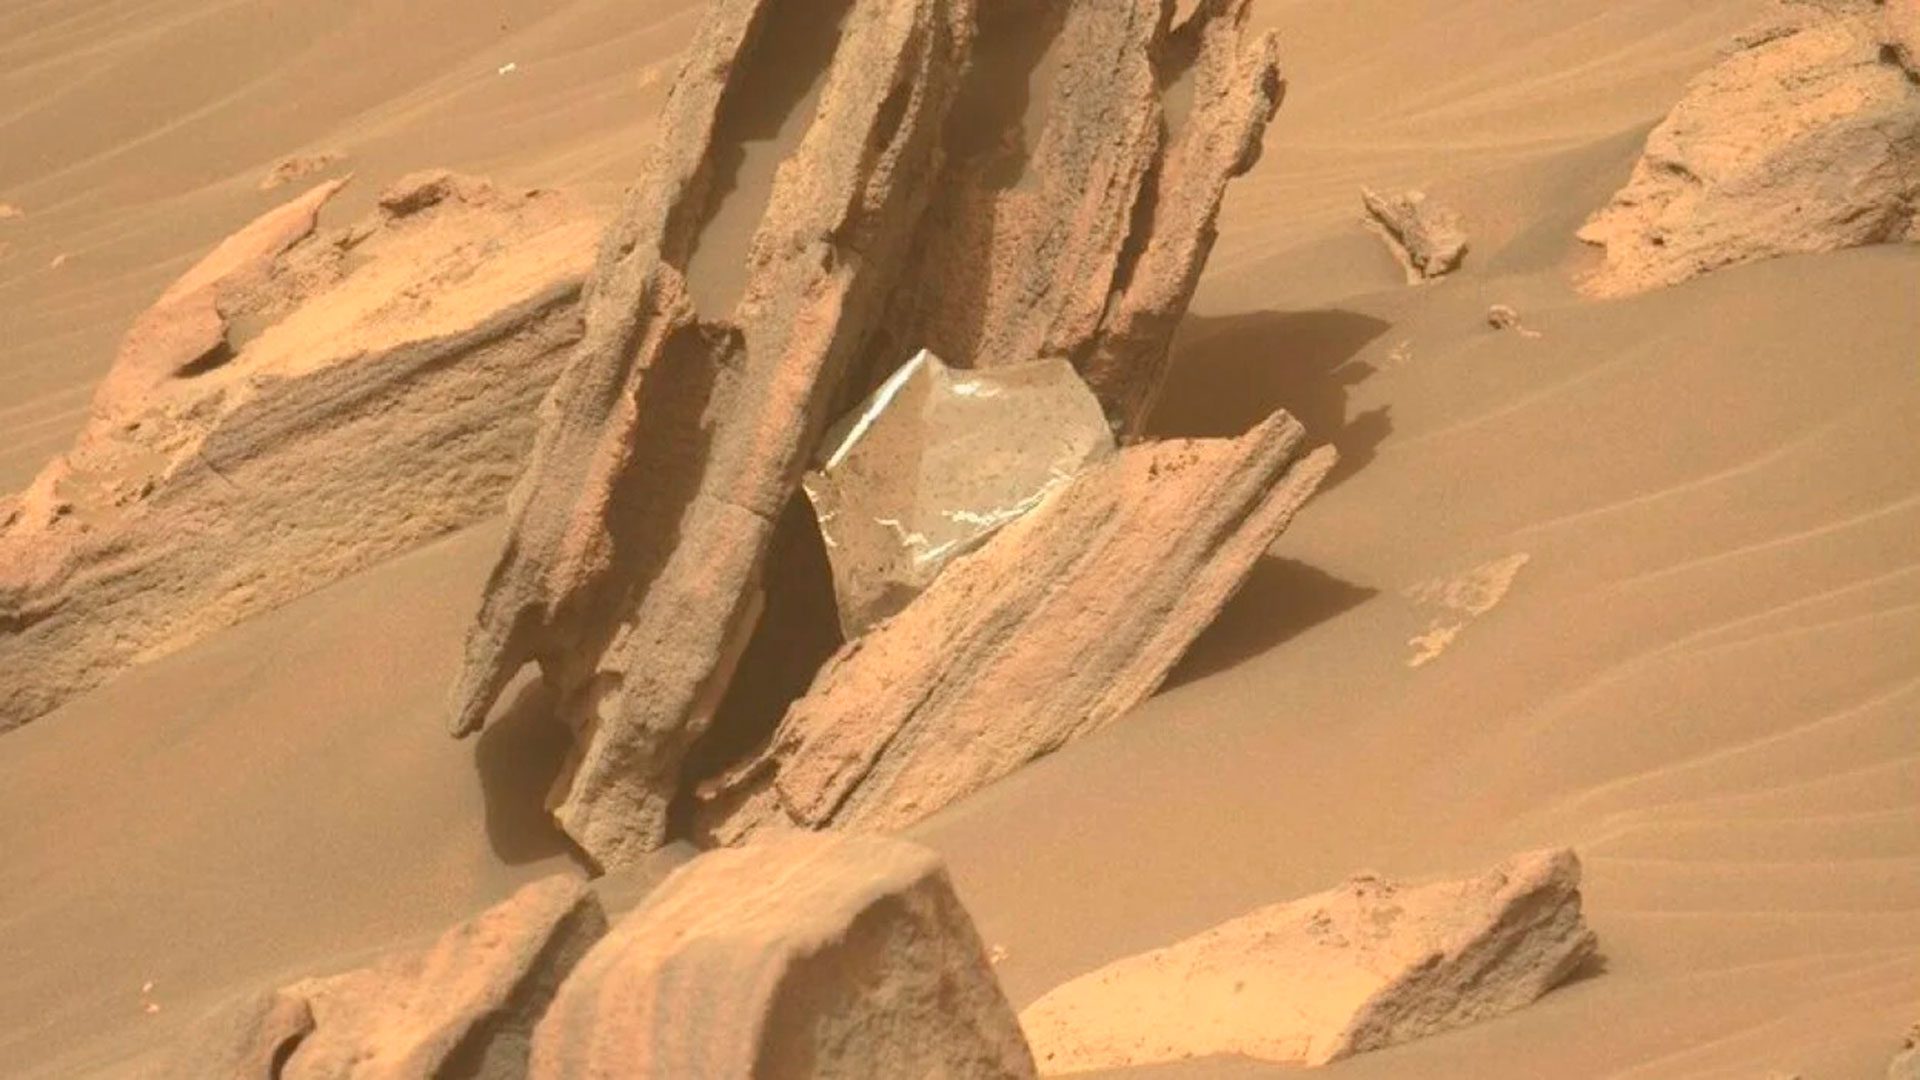 The rover reached the base of the delta in April.  He soon discovered gray, thin rocks called shale, which could have formed from sediments deposited by a slow-moving river or lake.